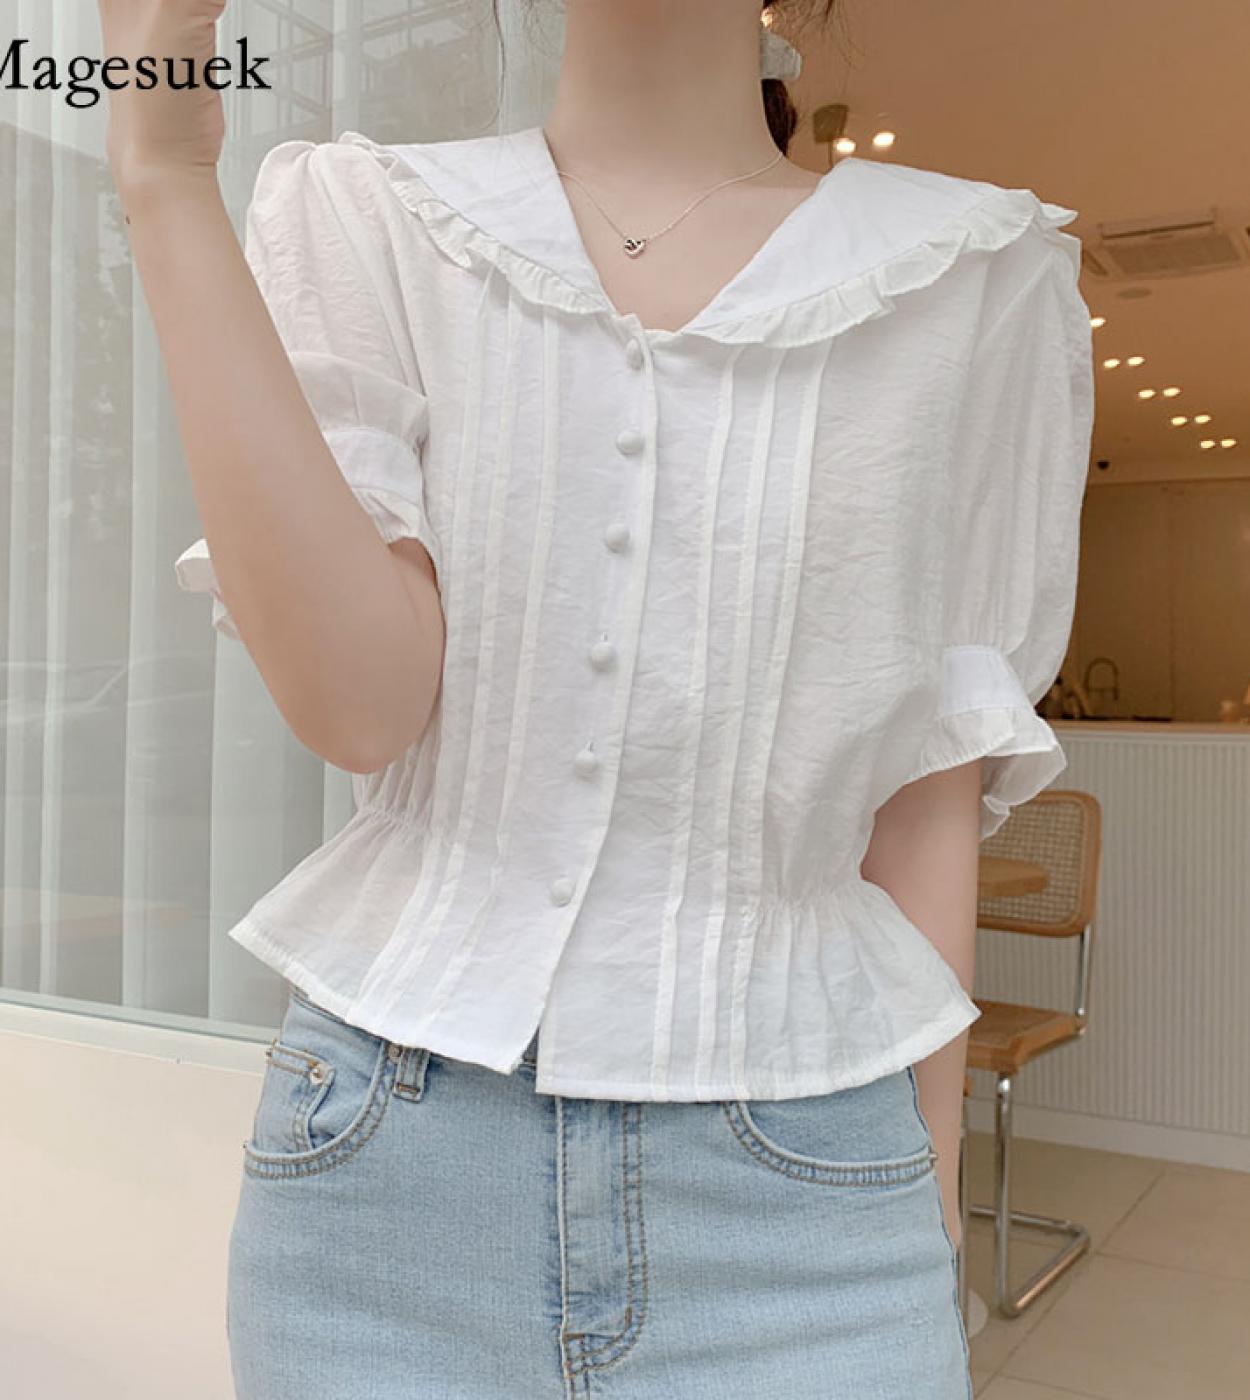  Peter Pan Colla Blouse  Summer Short Sleeve Tops Preppy Style Ladies White Shirt Ruffles Blouse Women Clothes 10103  Wo